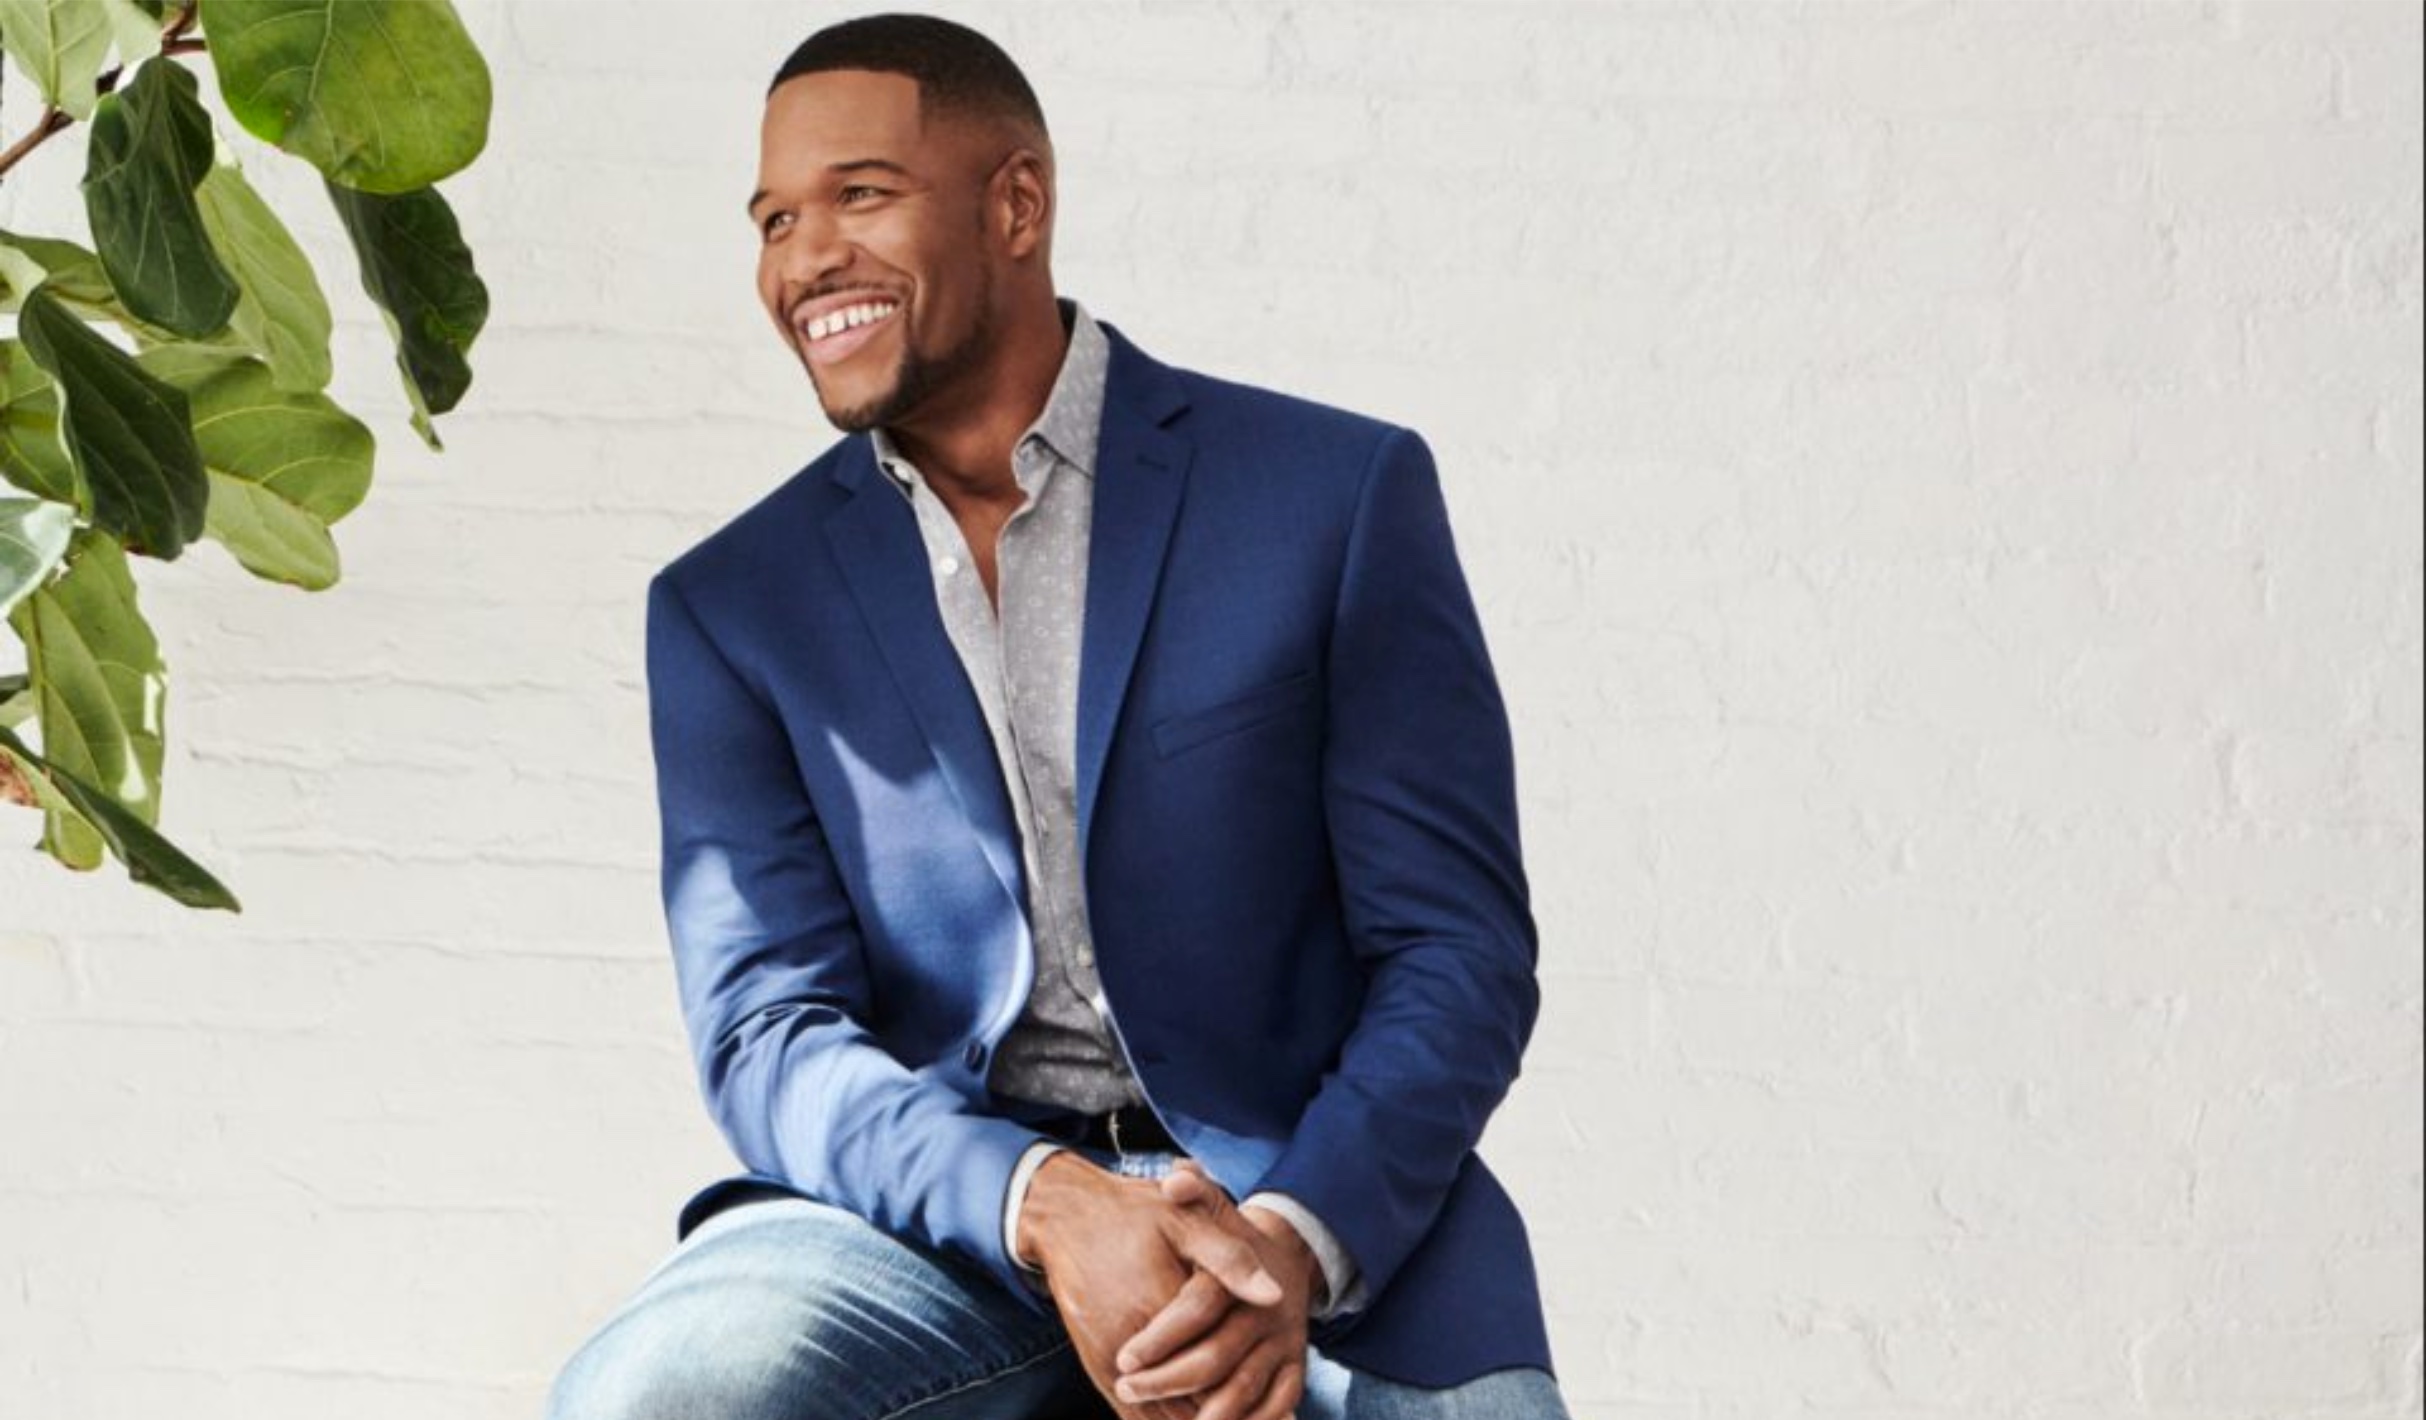 Mens Wearhouse Collaborates With Michael Strahan 9to5toys 